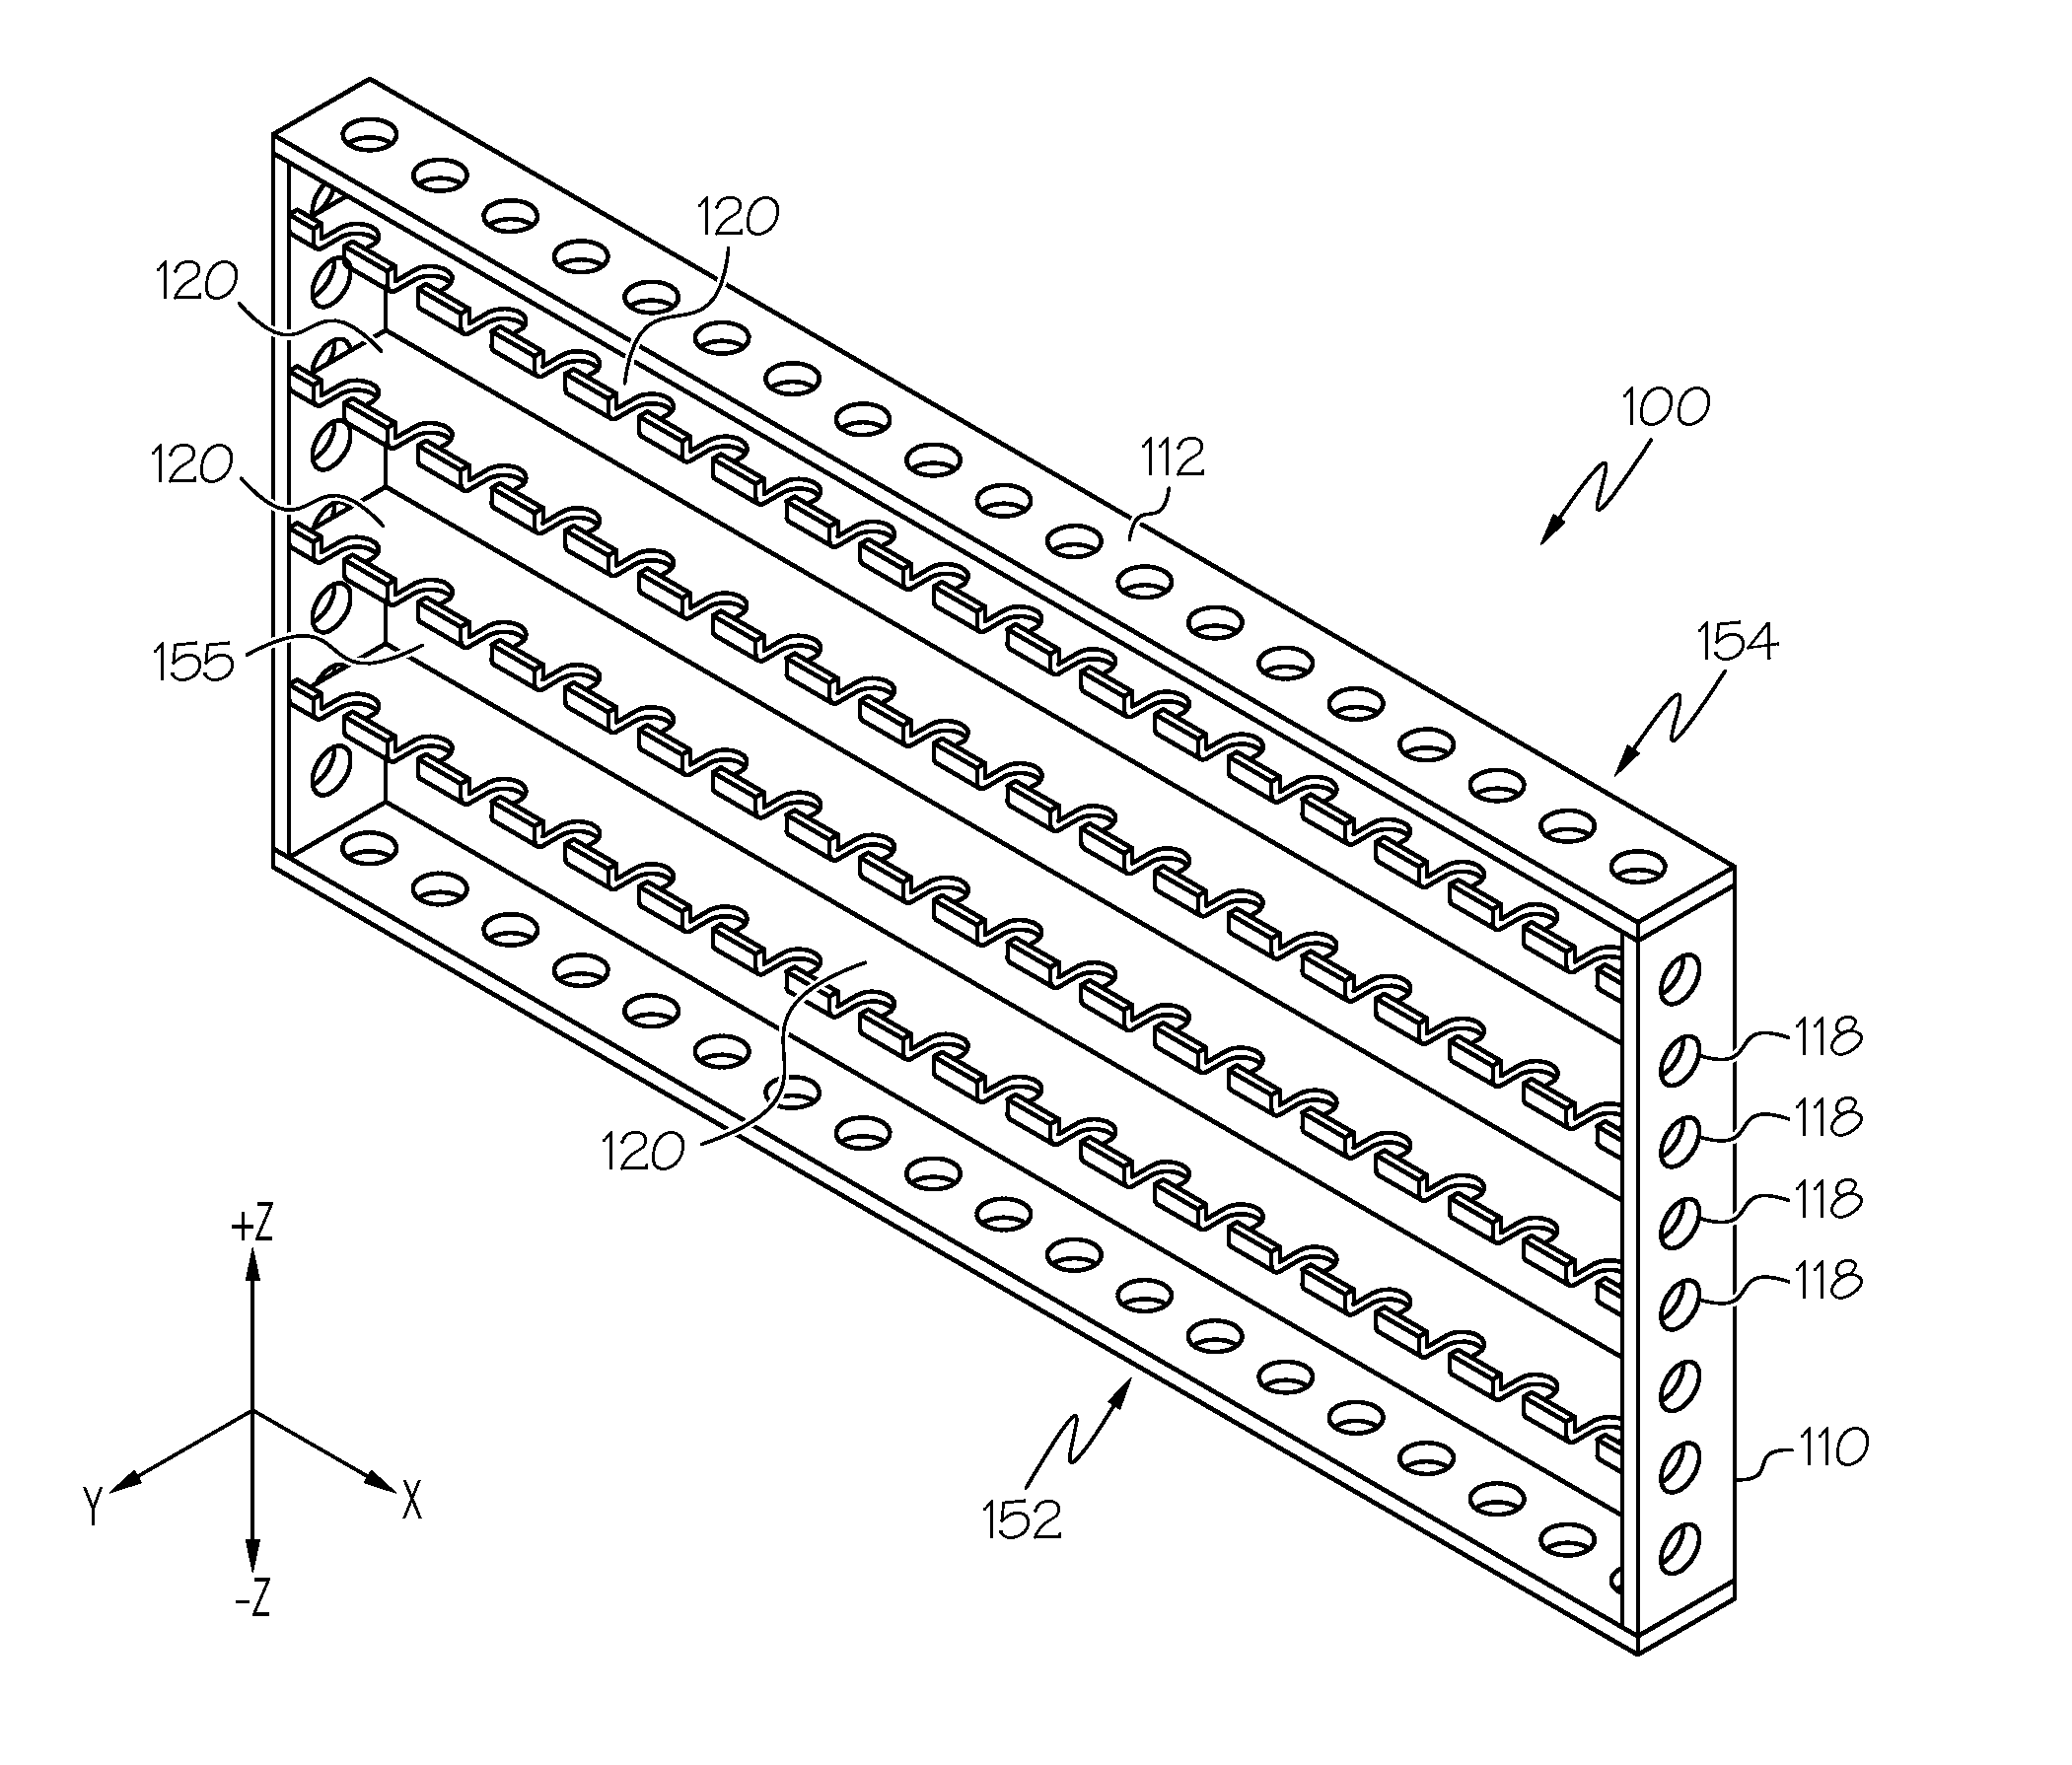 Apparatus for holding and retaining glass articles